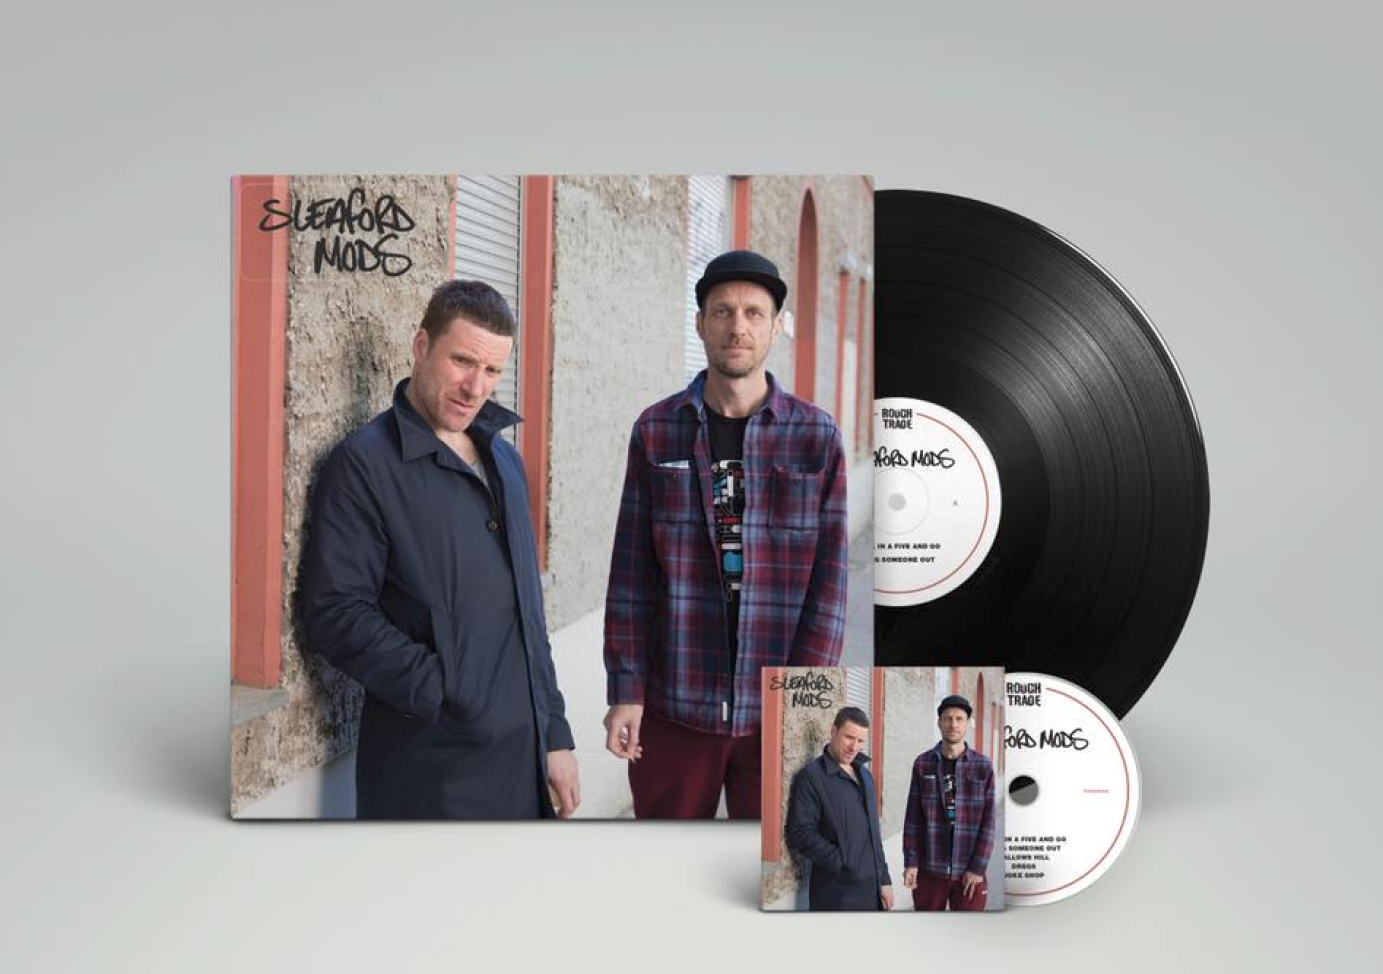 Photography for Sleaford Mods by Duncan Stafford